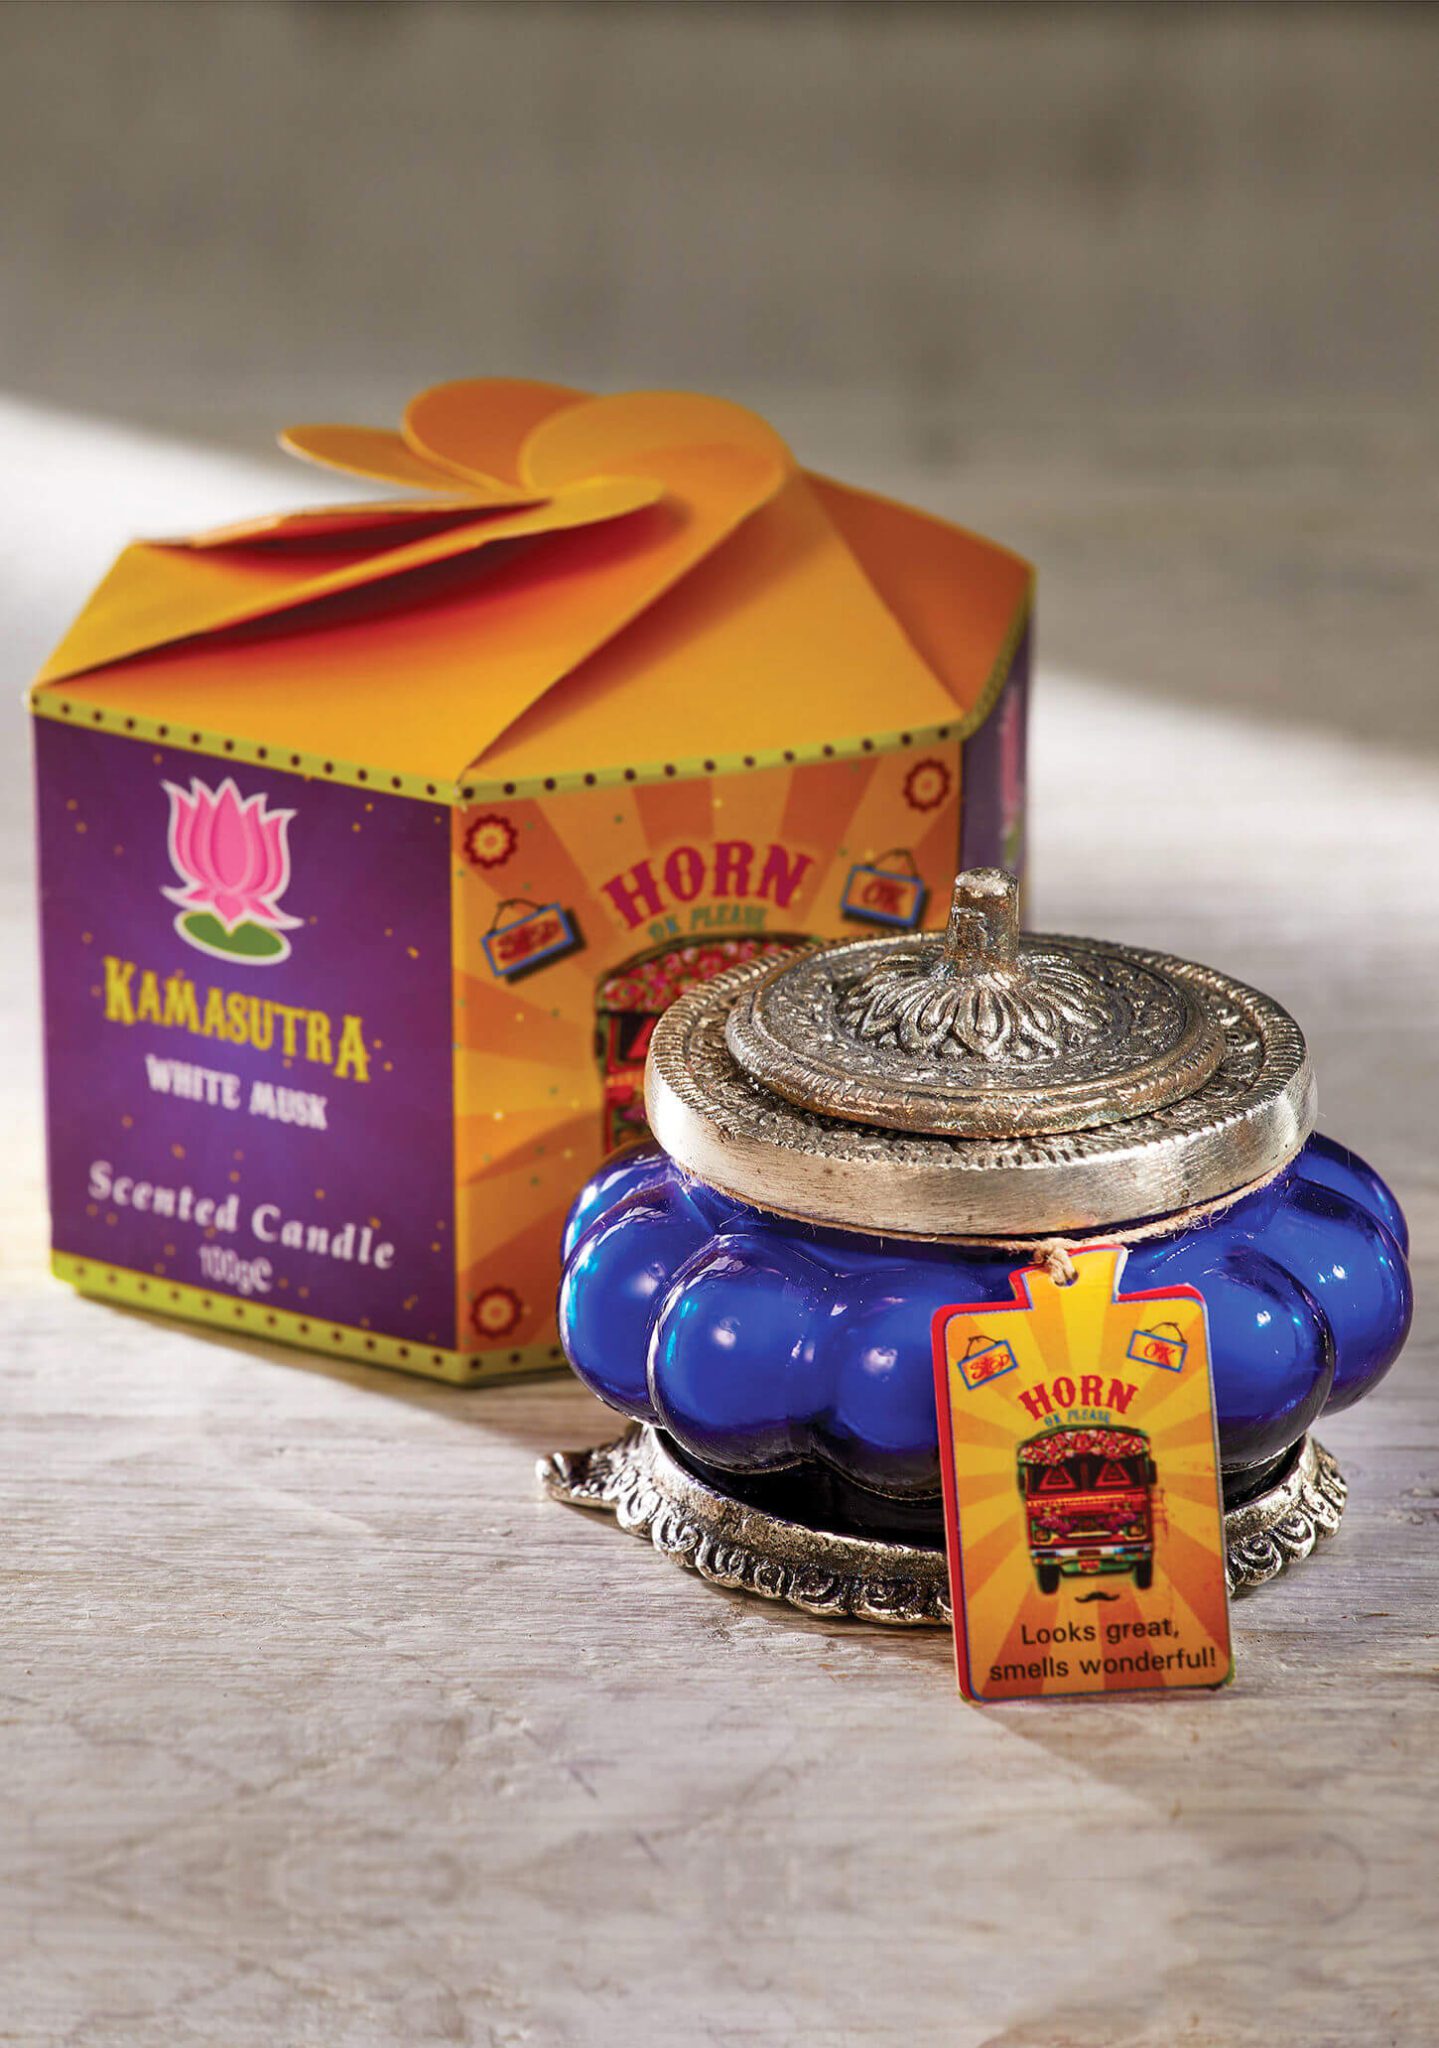 Scented Candle In Glass Jar - karmasutra